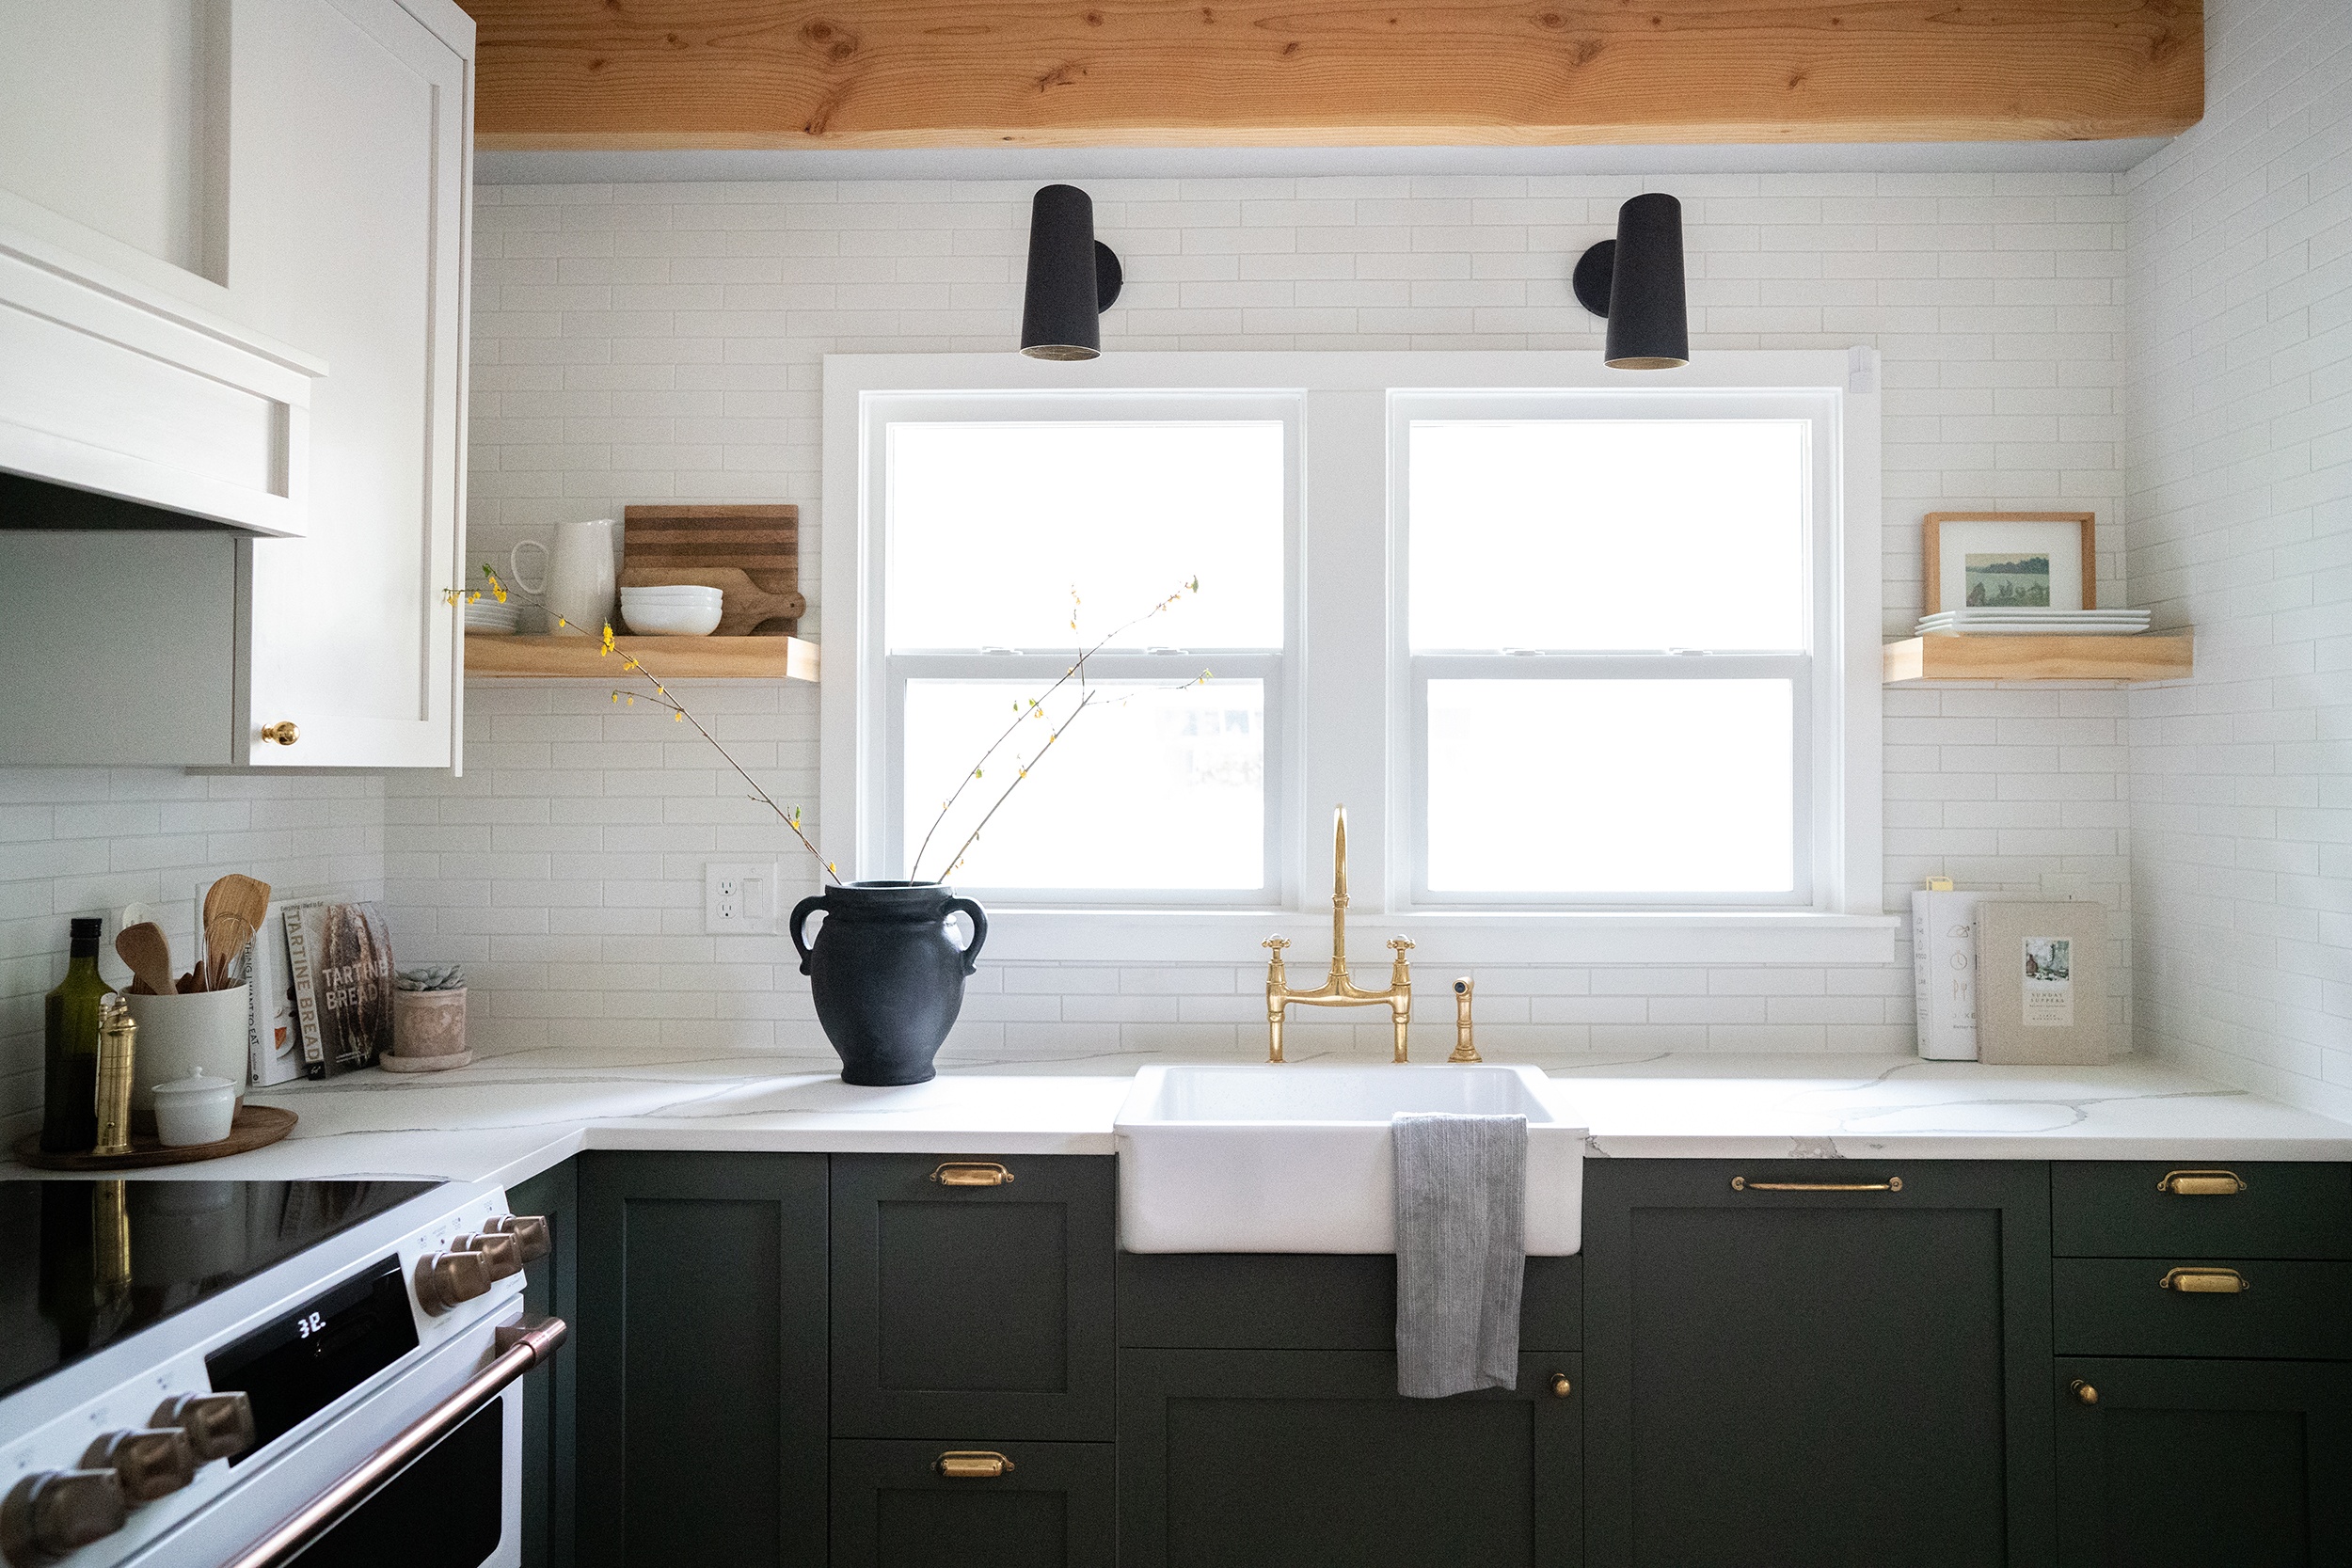 Black kitchen cabinets with windows